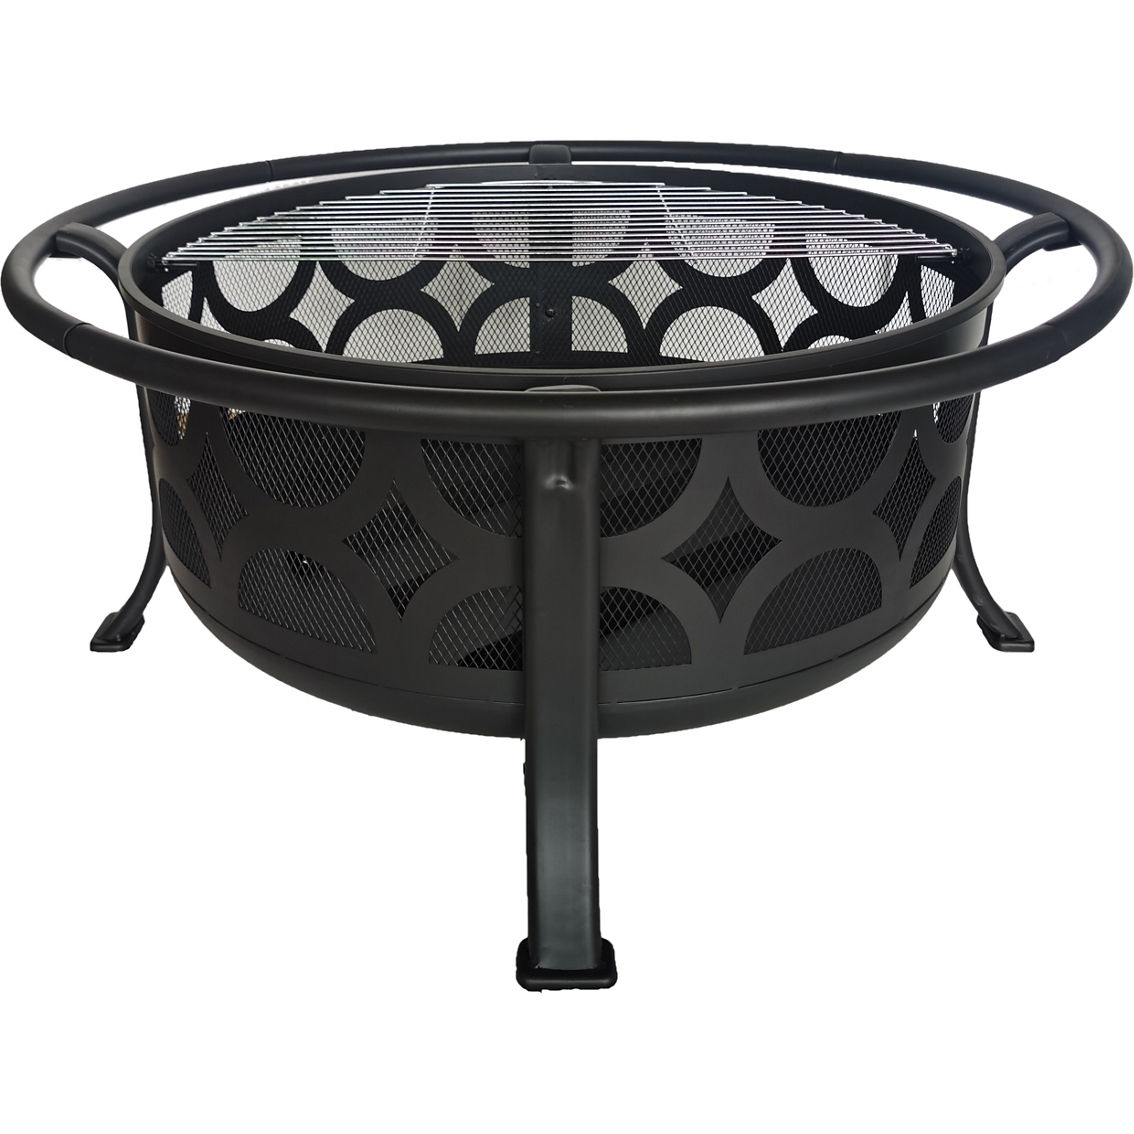 Chard 36 in. Round Steel Fire Pit with Spark Screen - Image 3 of 3